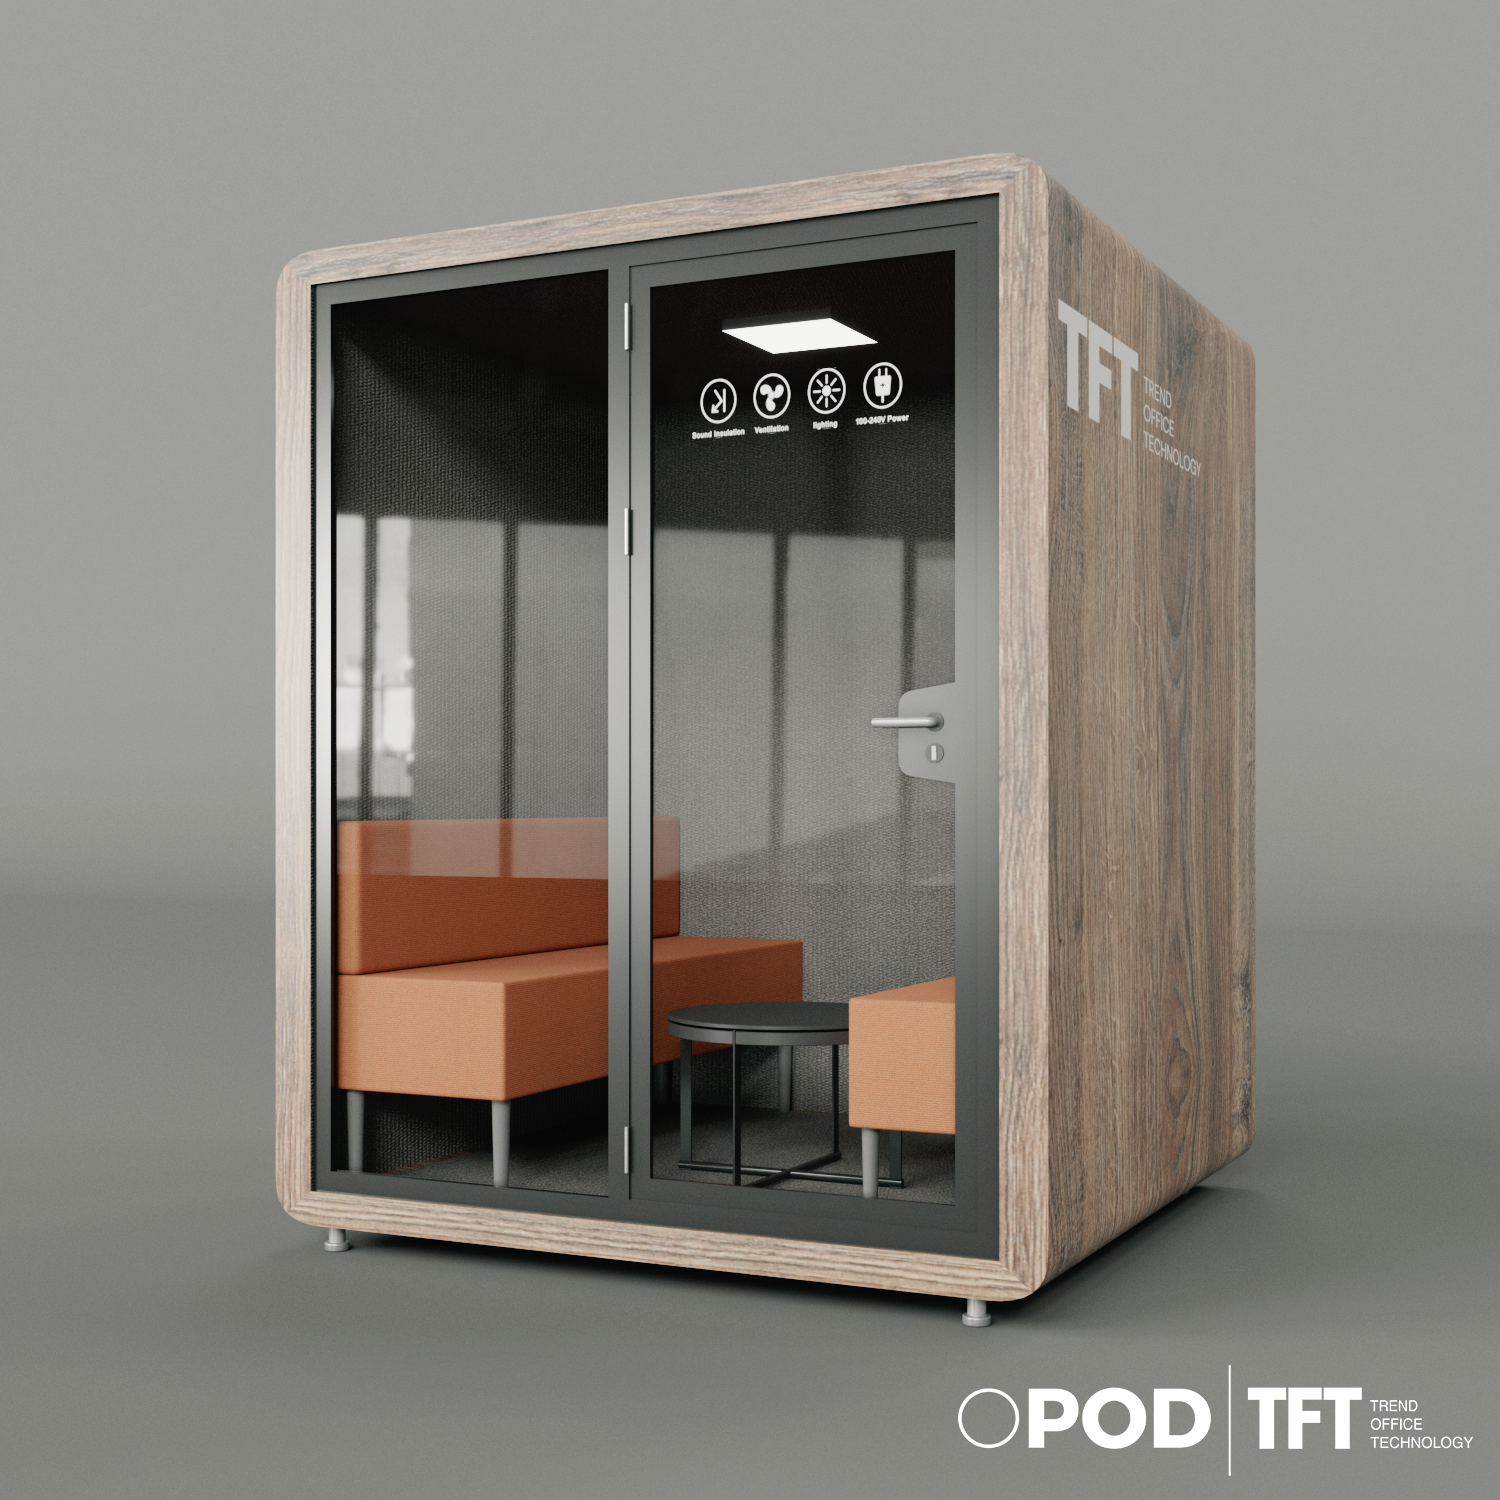 Soundproof Office Pod Framery Acoustics Meeting Booth Europe France, Germany, Spain, Ireland, Italy, Netherlands